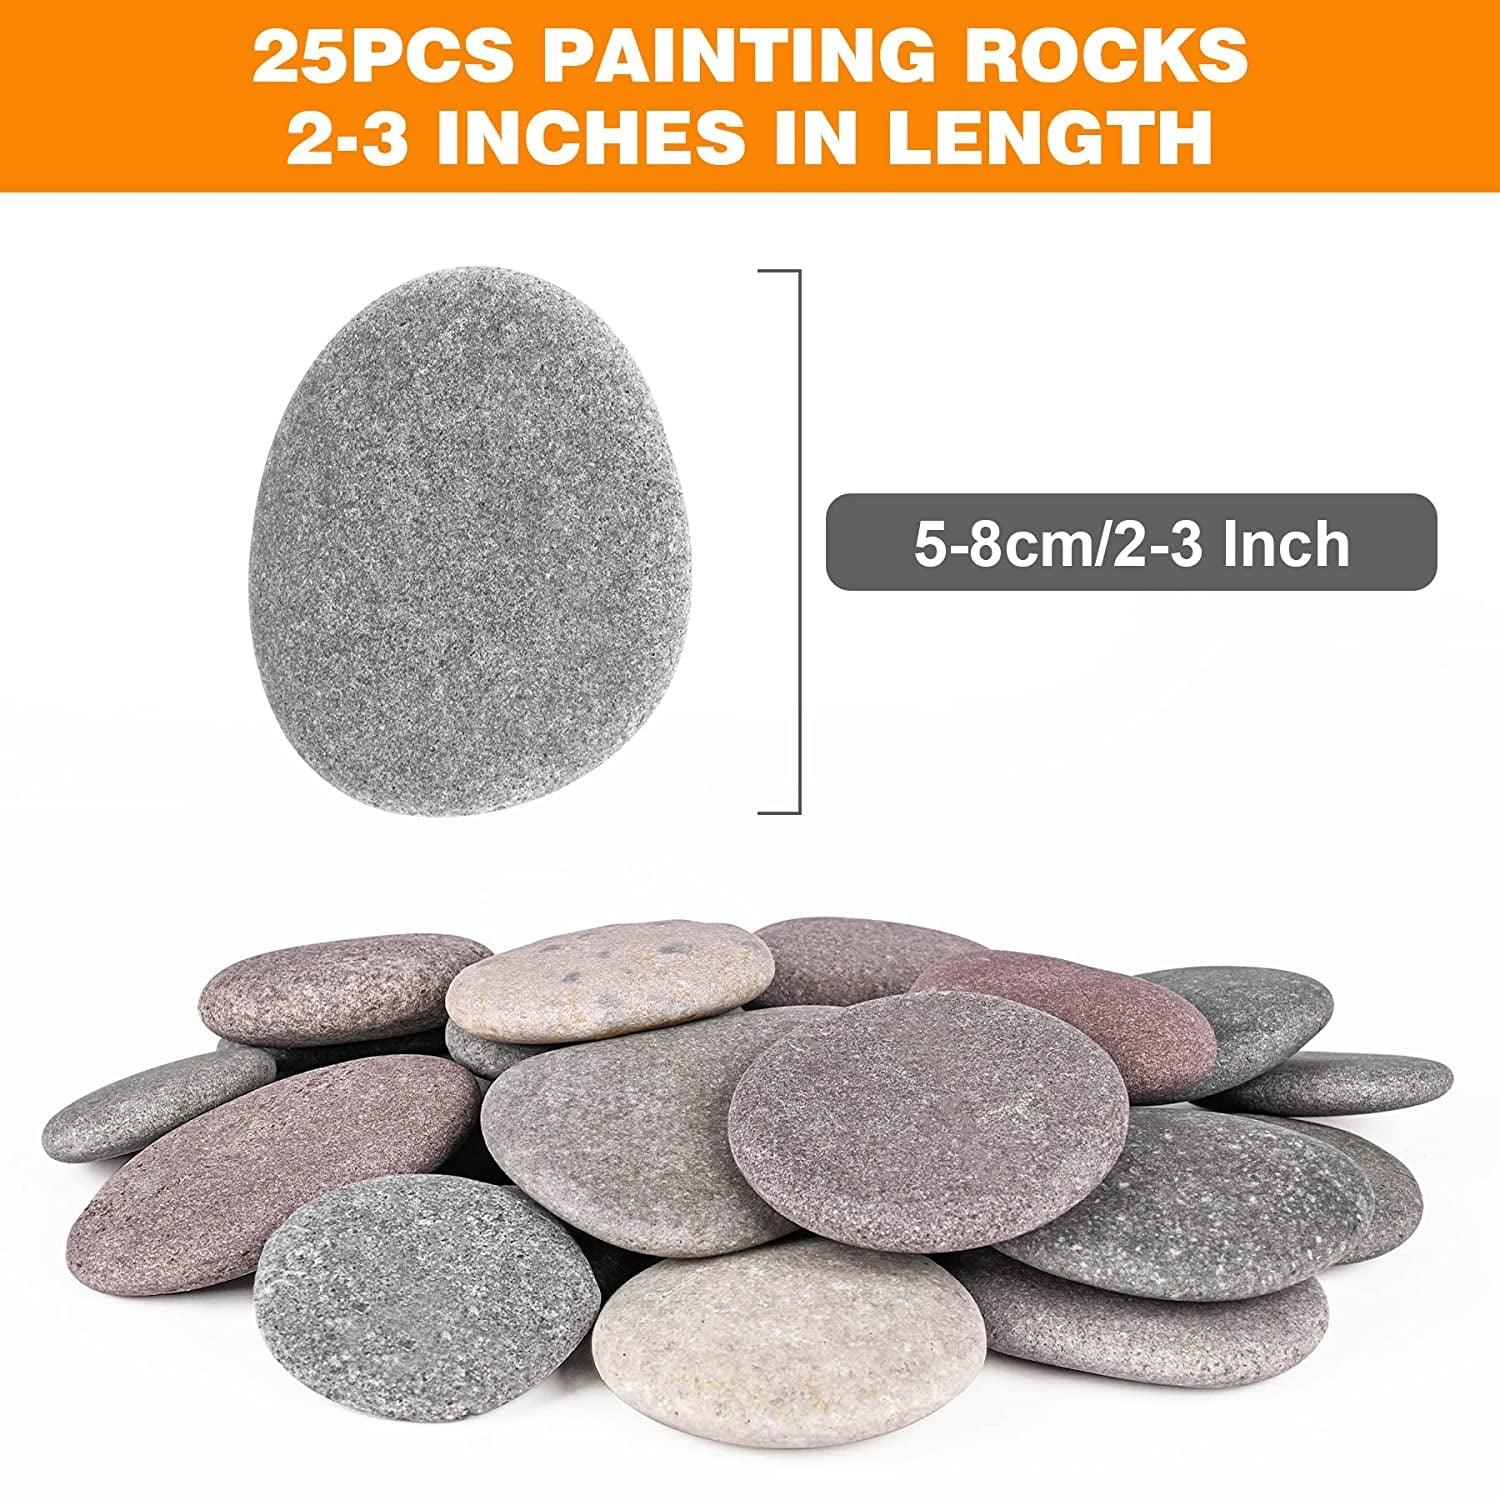 Landscaping Pebbles Large River Rocks for Painting,Multi-Color Painting  Stones,3.3-4.5 inch Landscaping Pebbles Flat Rocks for Arts (10pcs)